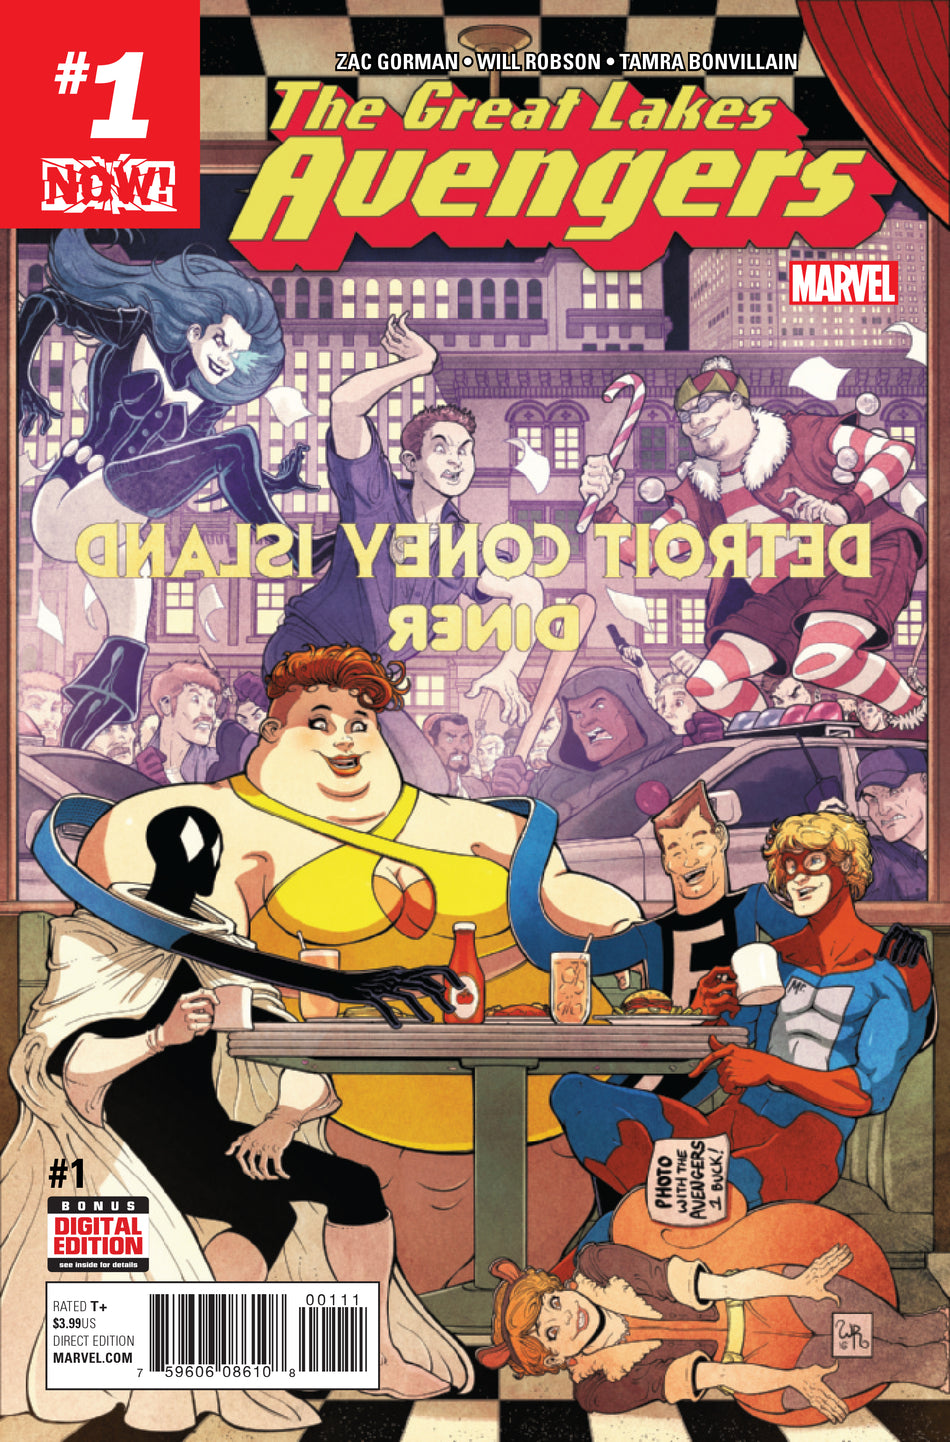 Photo of Great Lakes Avengers #1 Now comic sold by Stronghold Collectibles